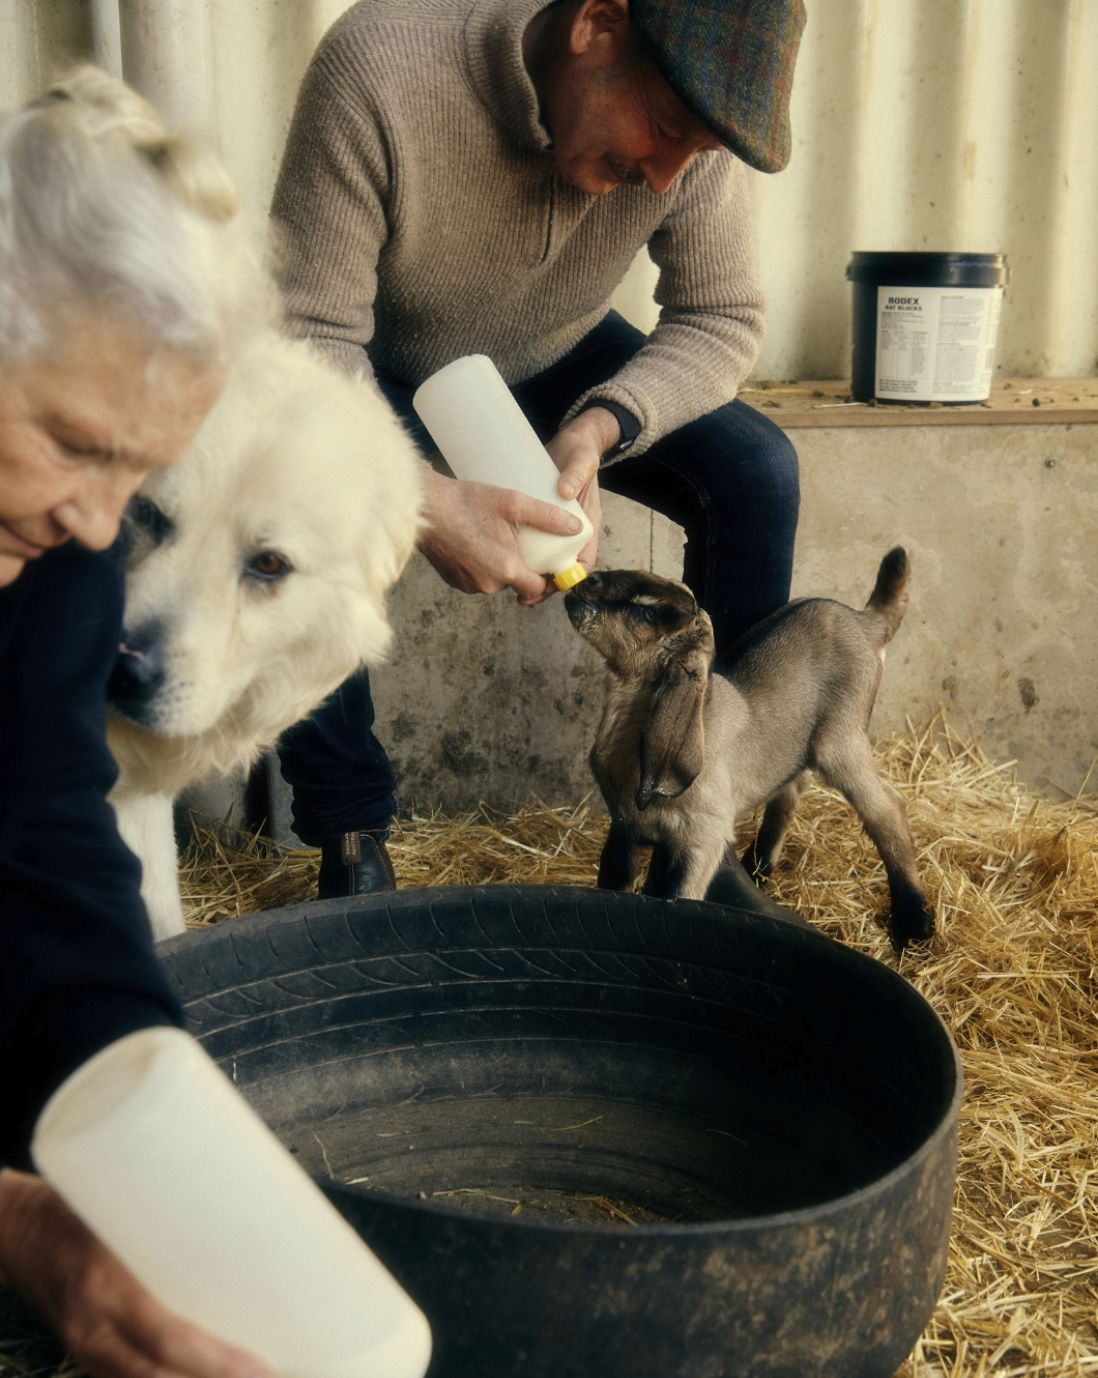 Man feeding a baby goat a bottle next to a white dog in a barn